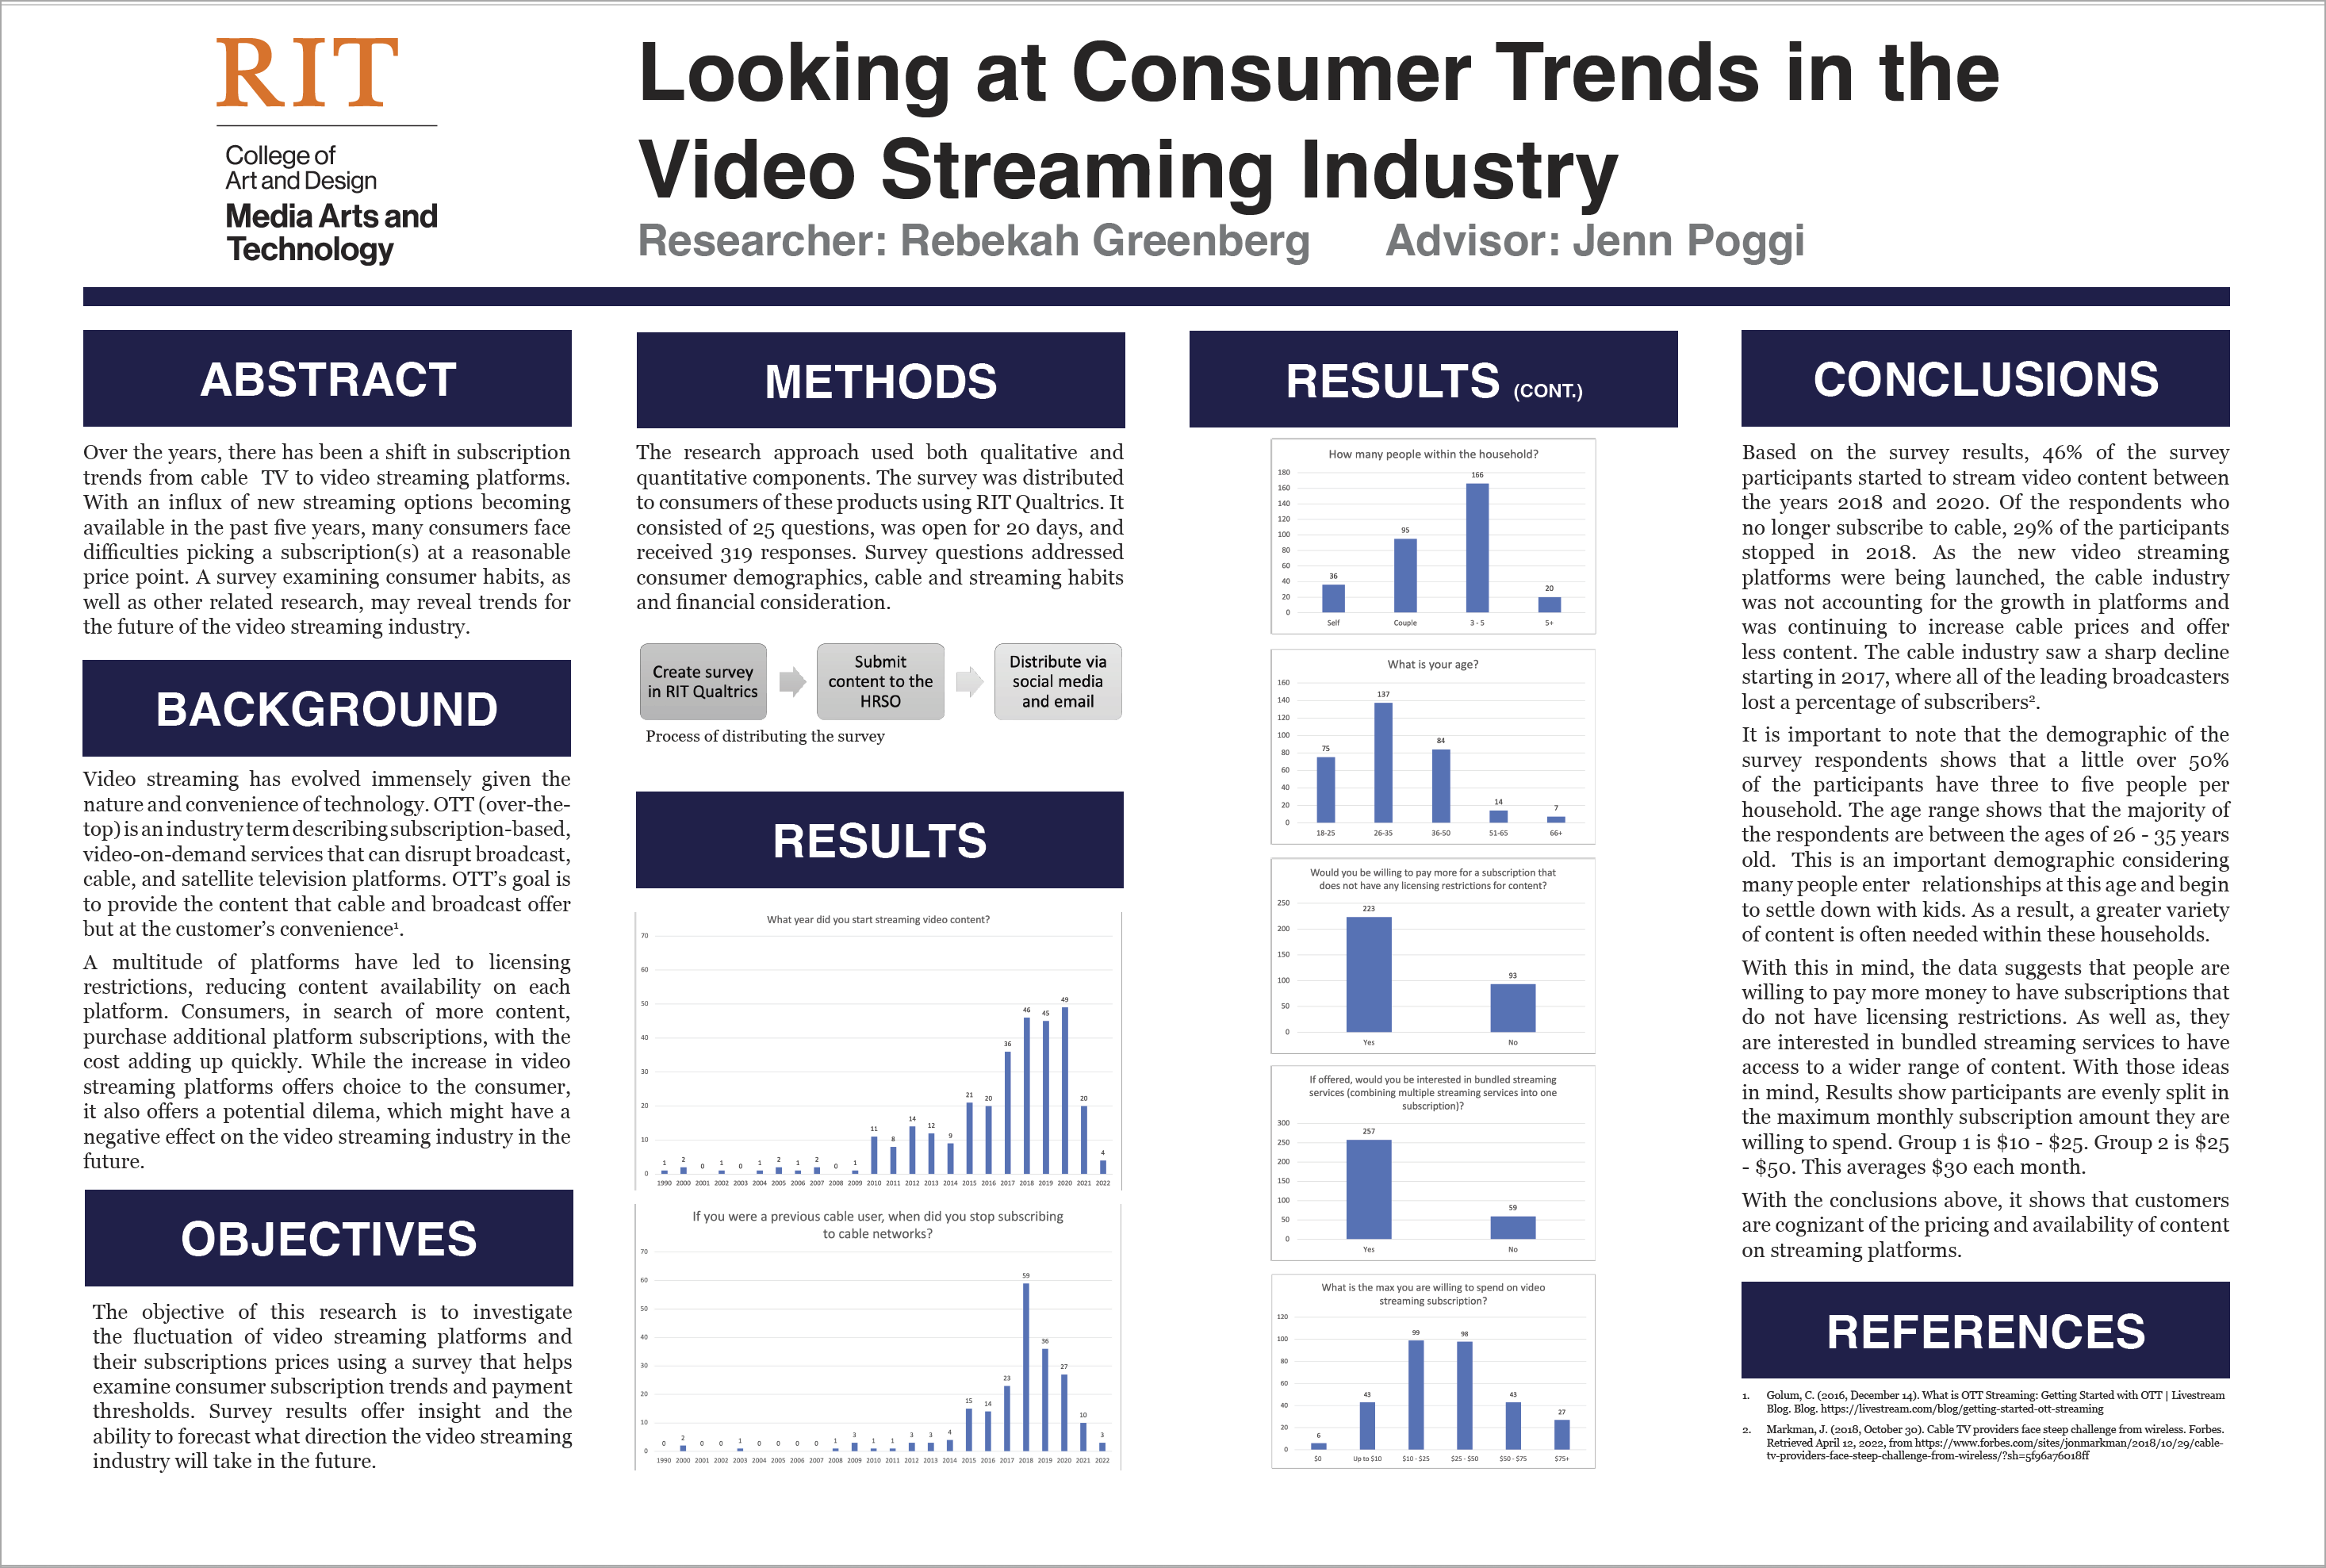 A poster highlighting research on looking at consumer trends in the video streaming industry.